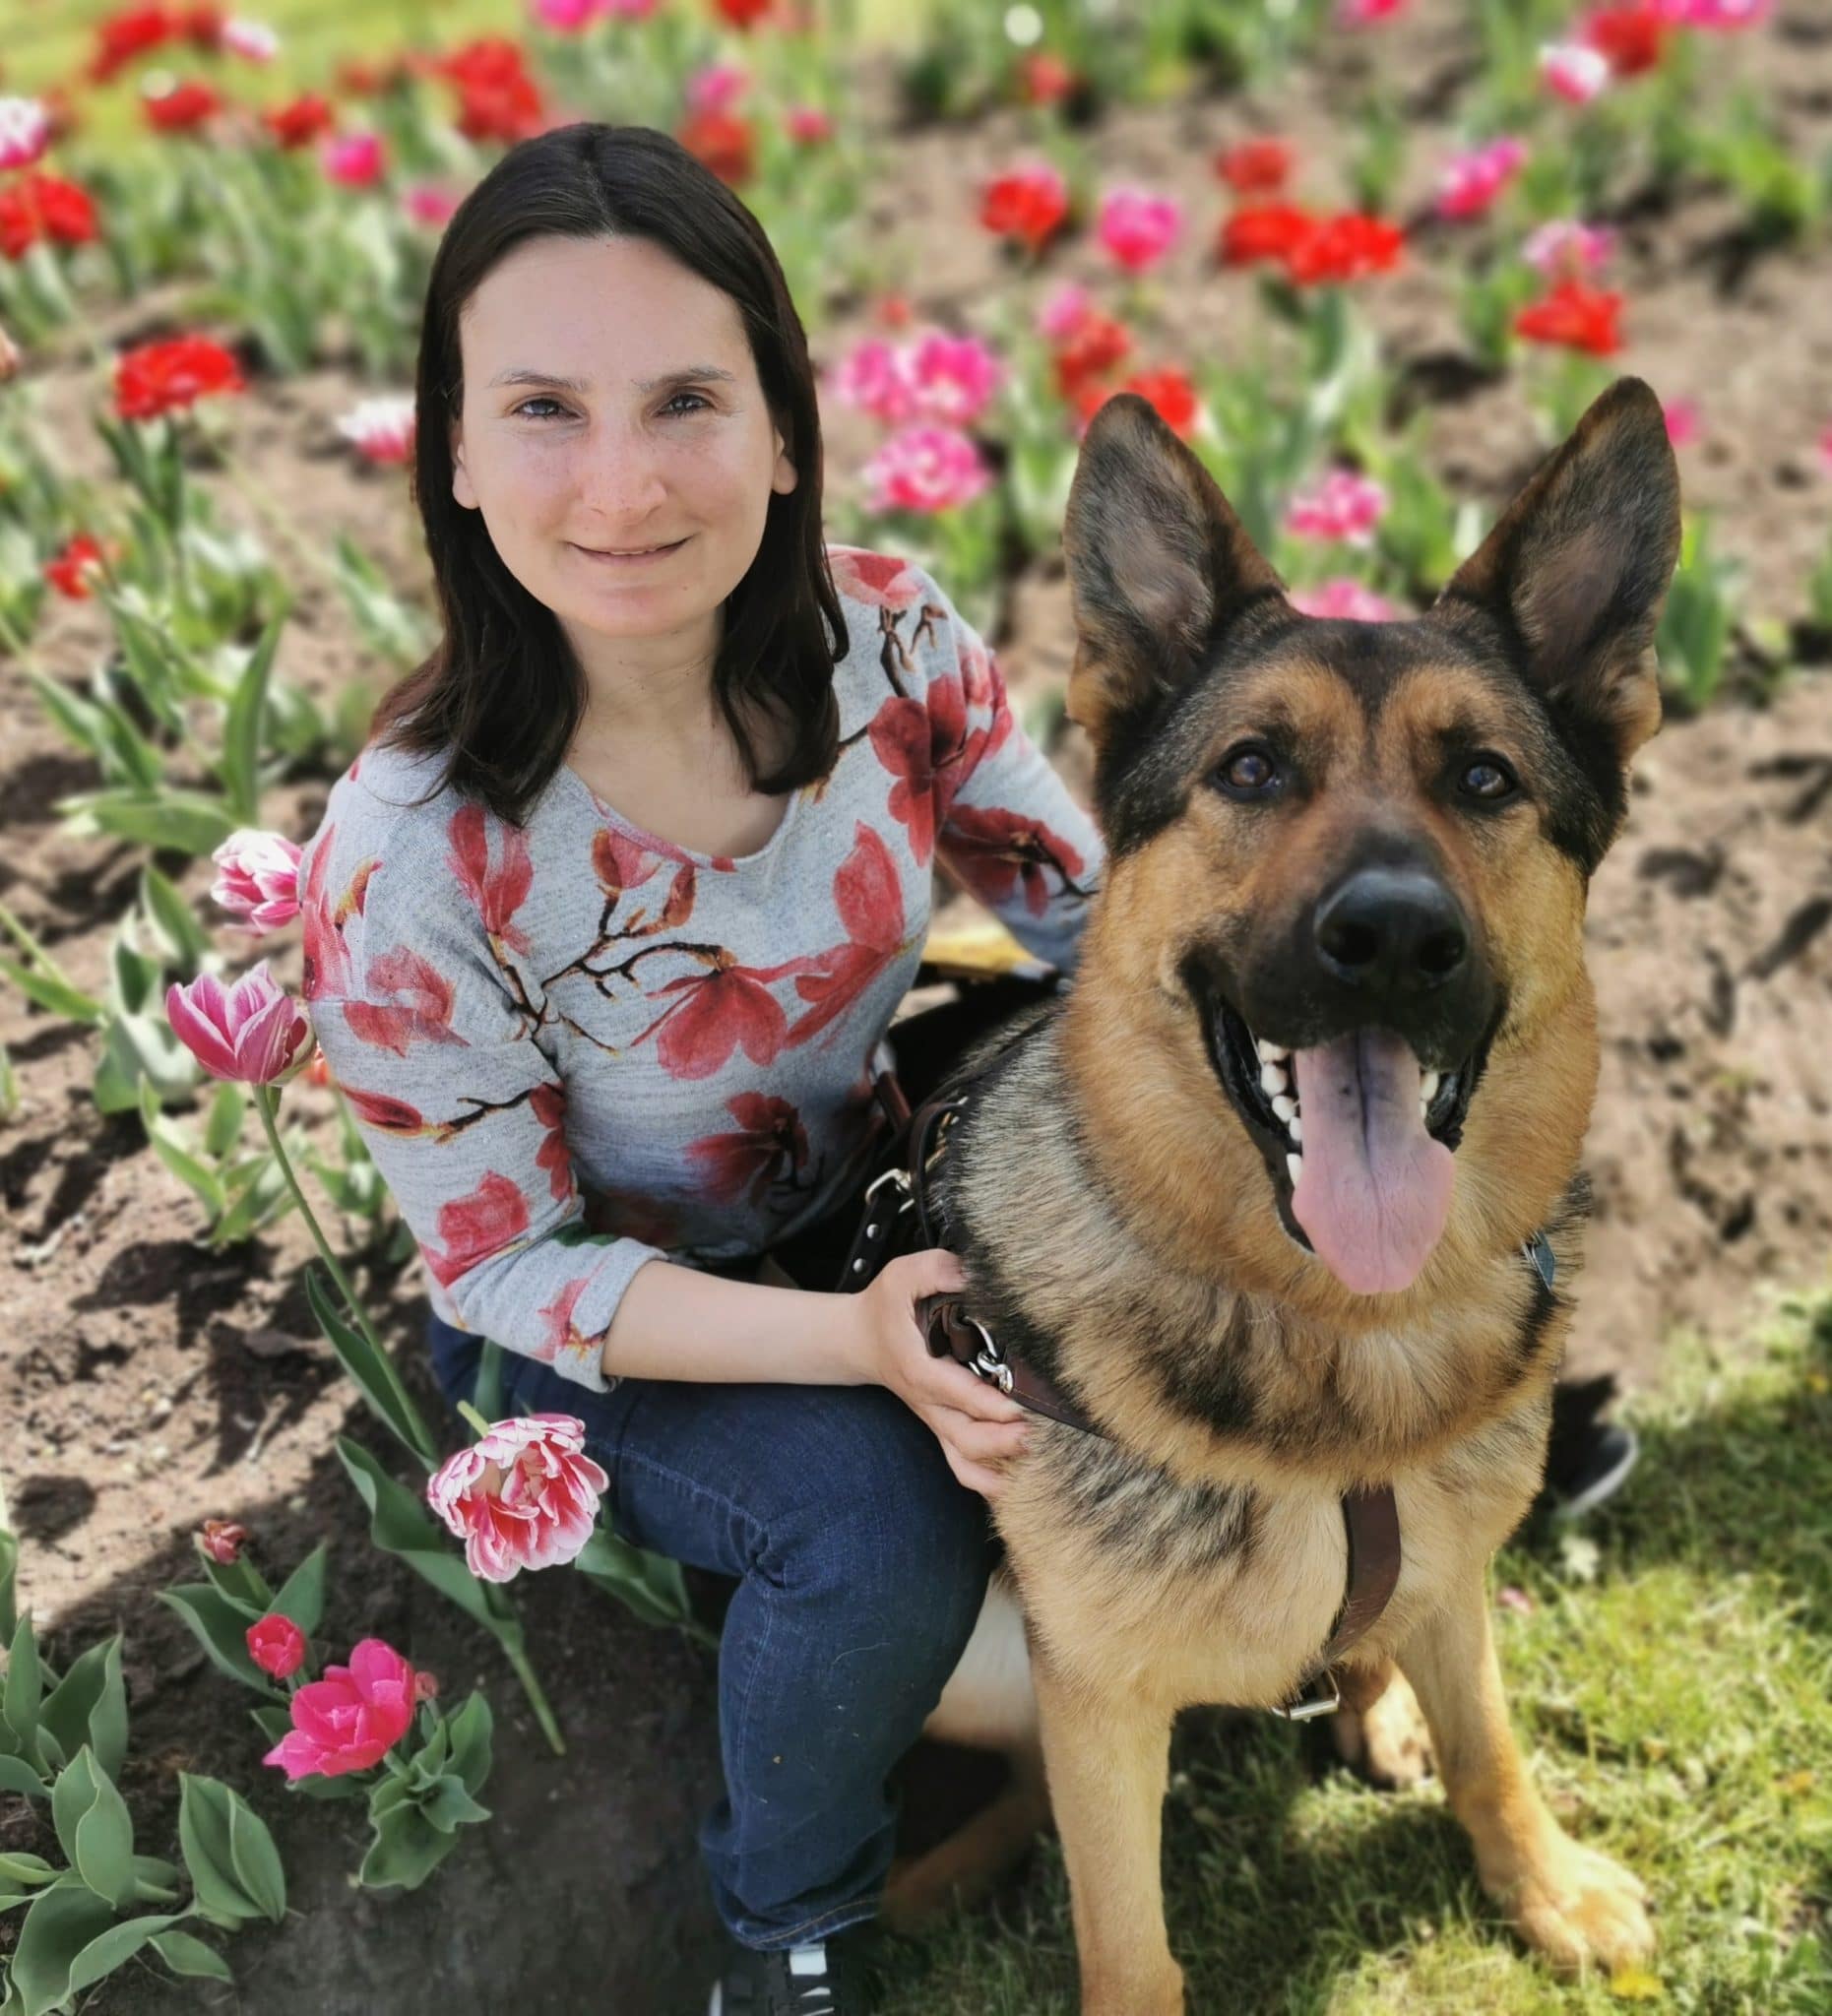 Esther sits in a field of flowers holding the harness of Zion her german shepherd guide dog in harness, both are smiling up at the camera